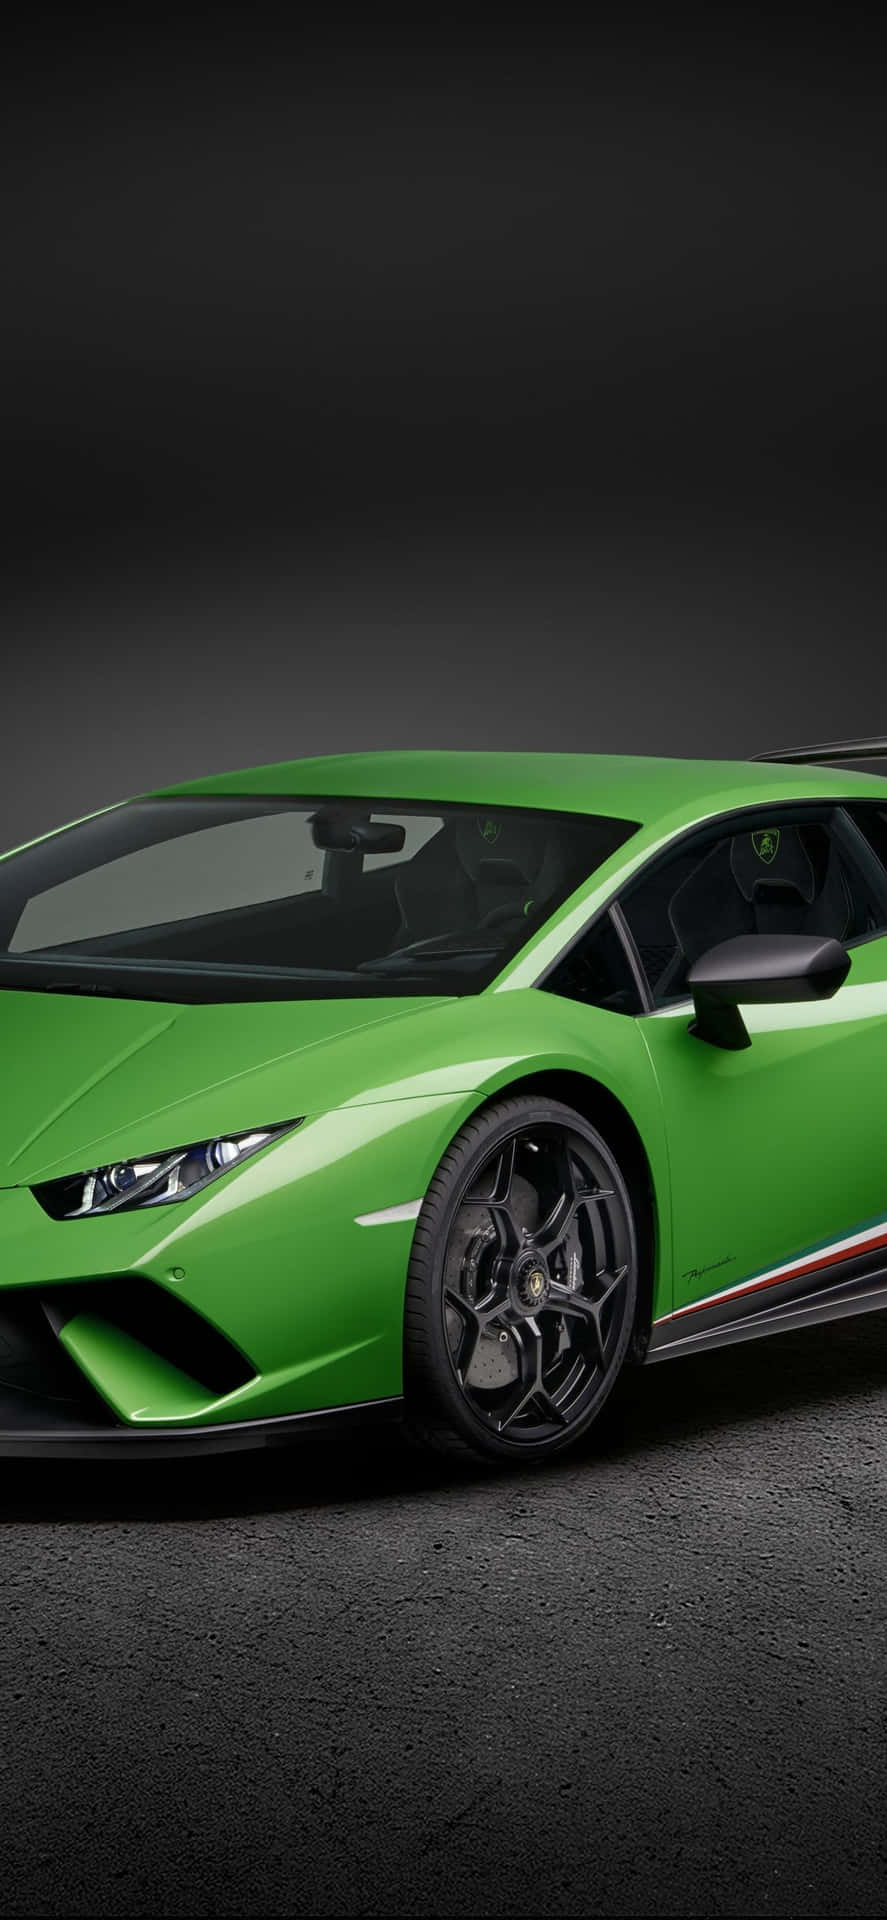 Take your journey to the next level with a green Lamborghini iphone. Wallpaper